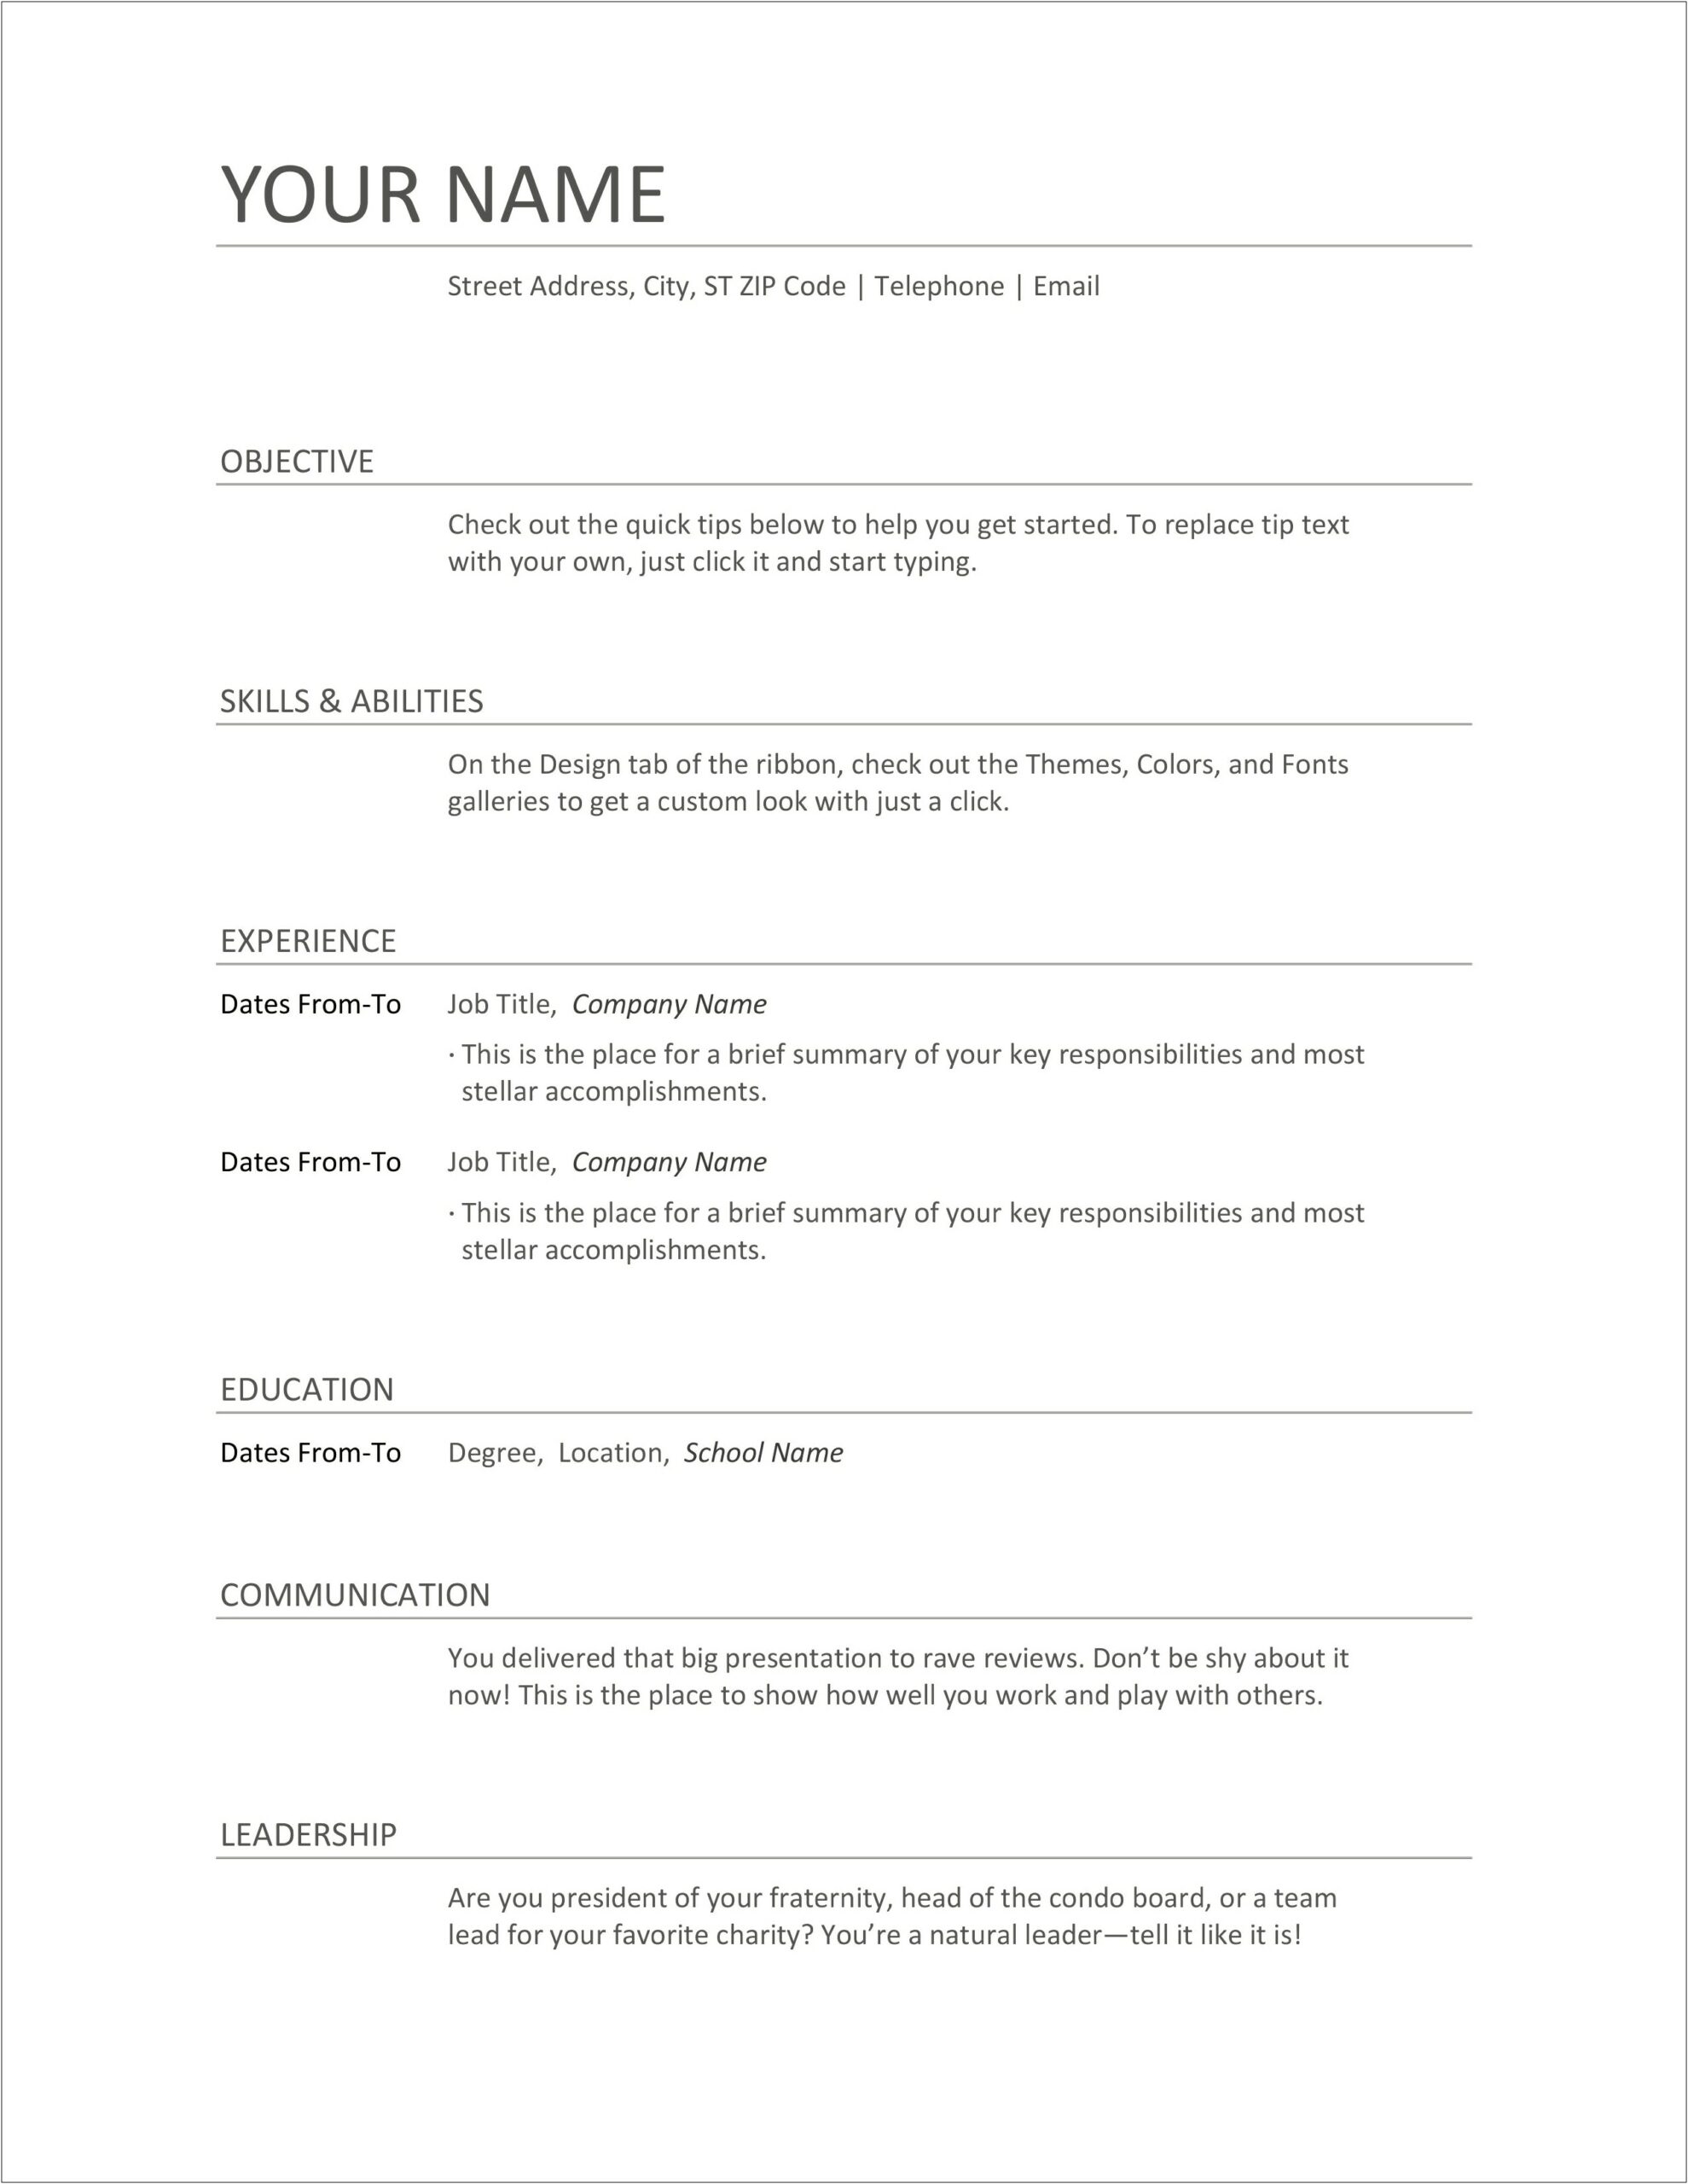 Writing A Resume With Multiple Jobs